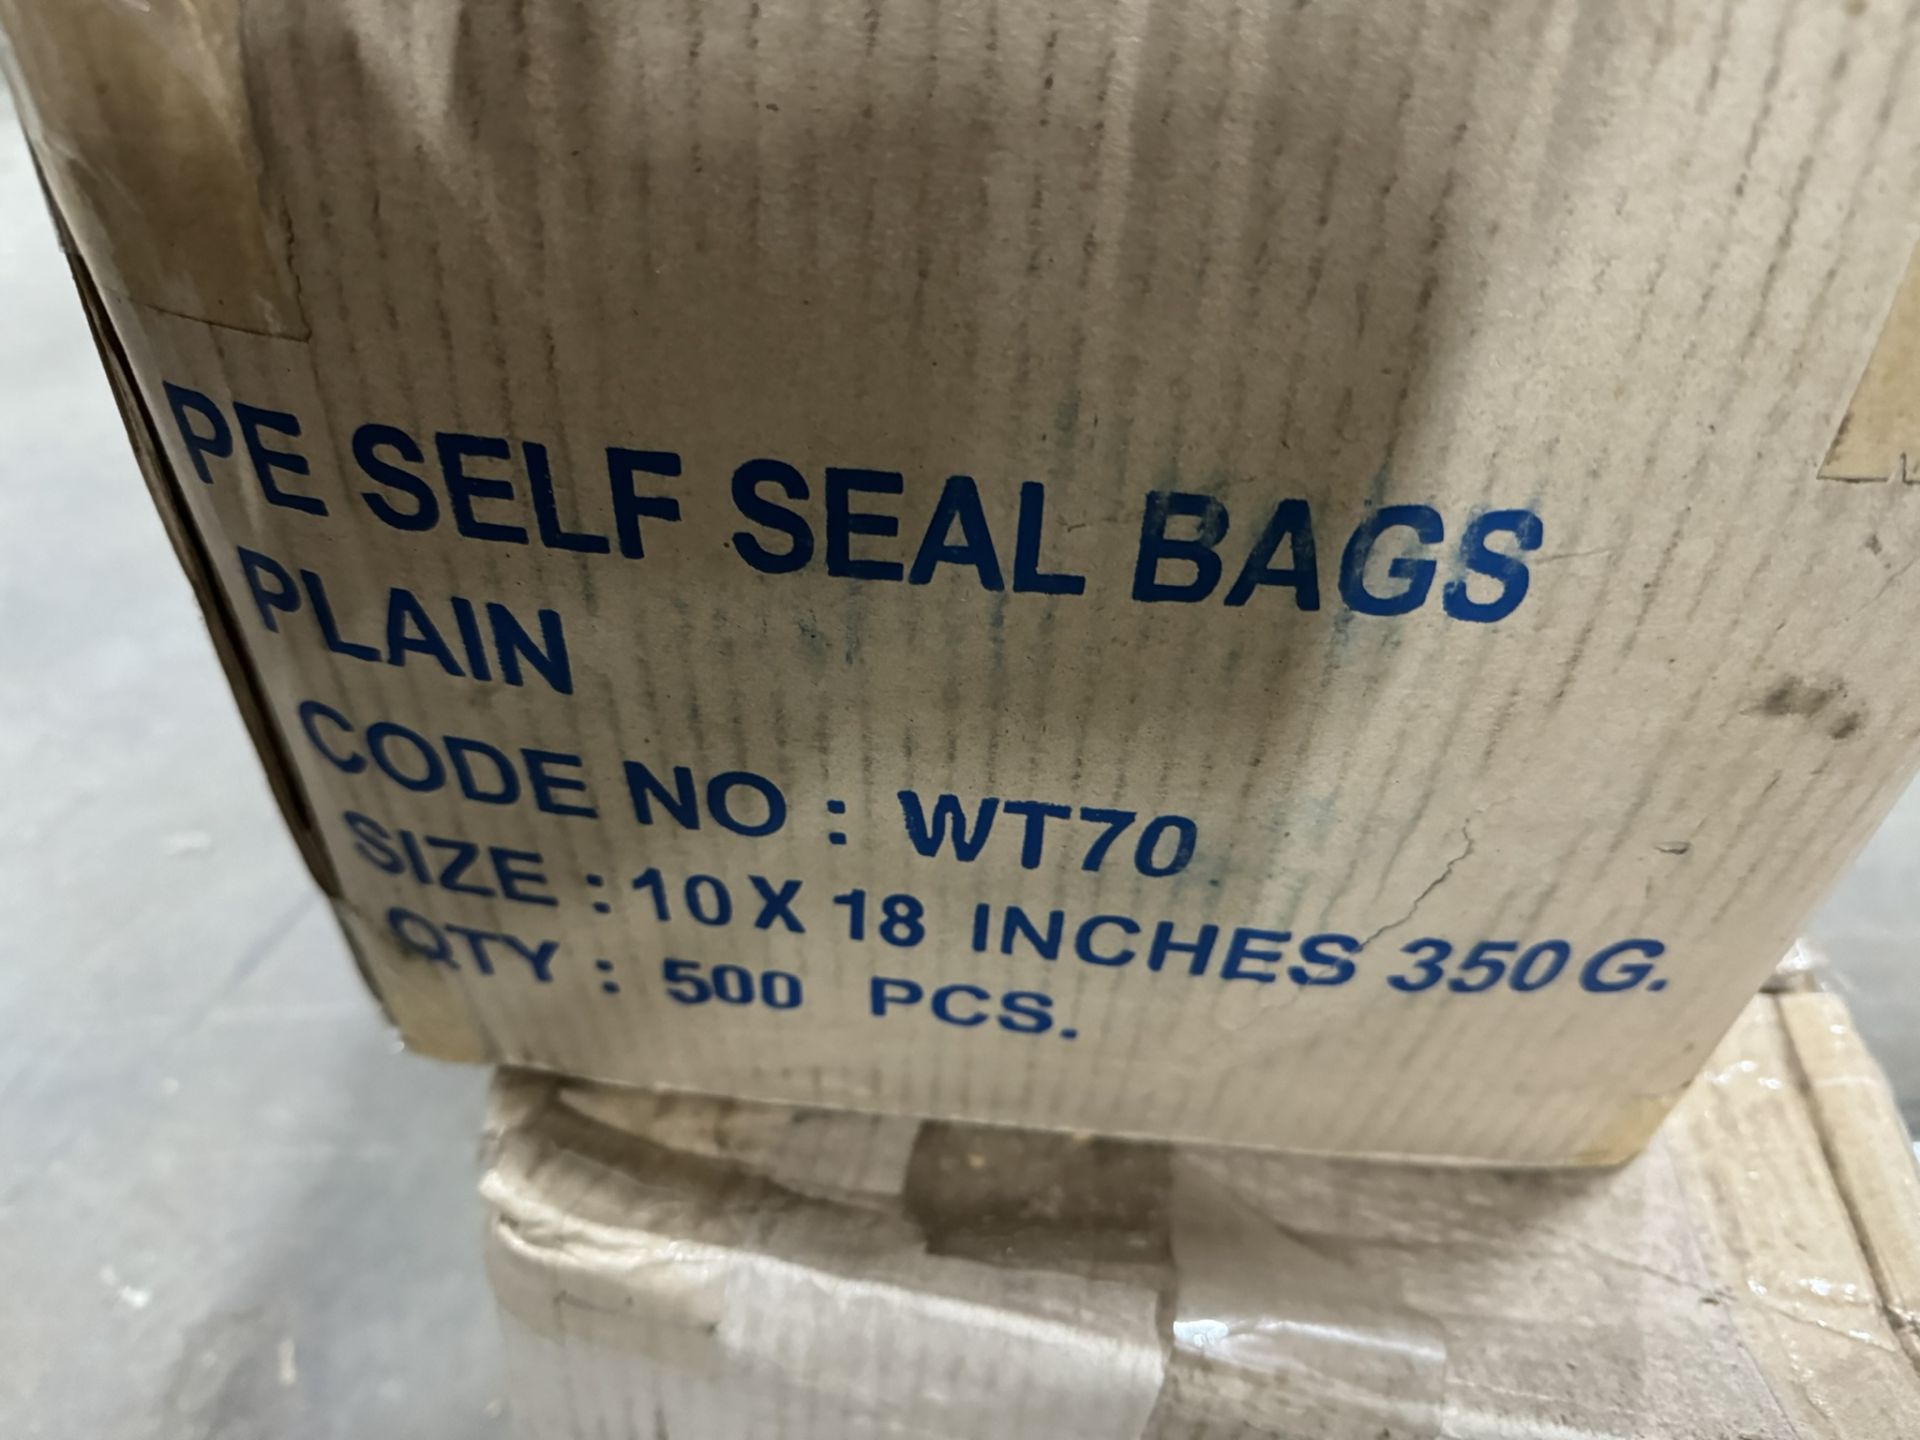 3 x Boxes Of Unbranded Plain Self Seal Bags - As Pictured - Image 3 of 4